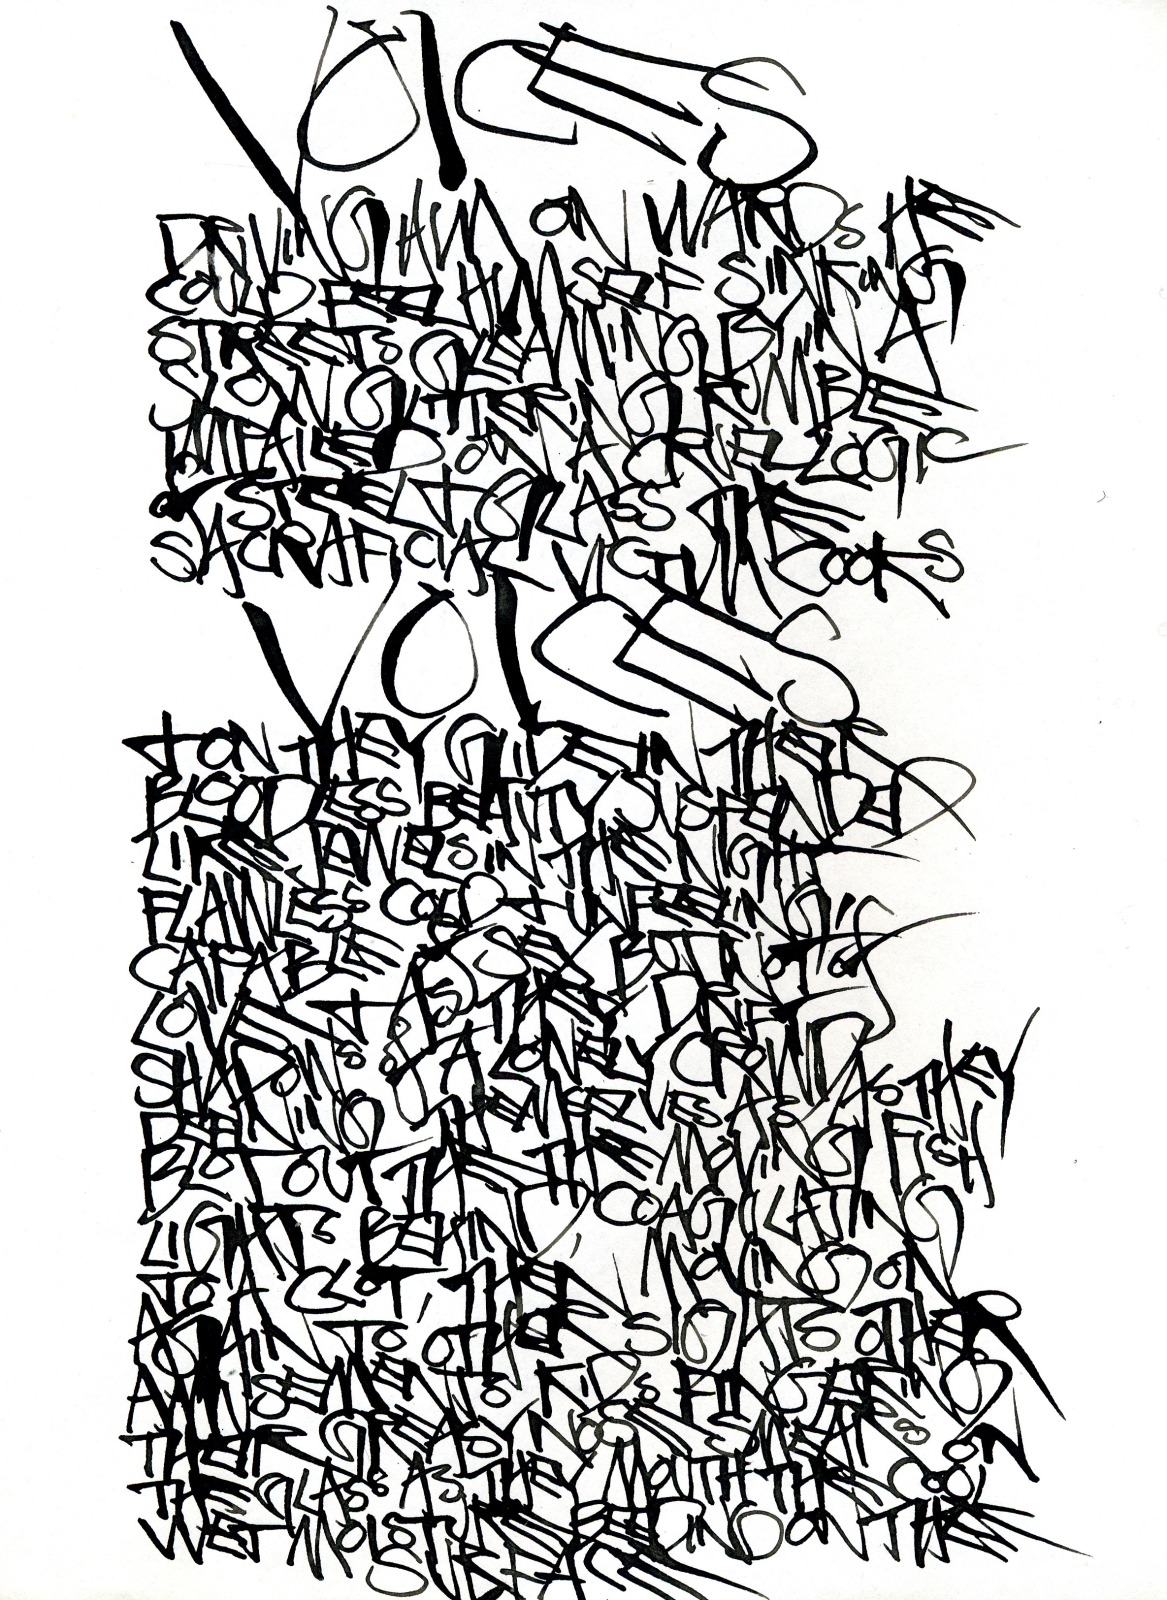 Martin Wong
Voices, 1971
ink on paper
11 x 8 1/2 in.
27.94 x 21.59 cm